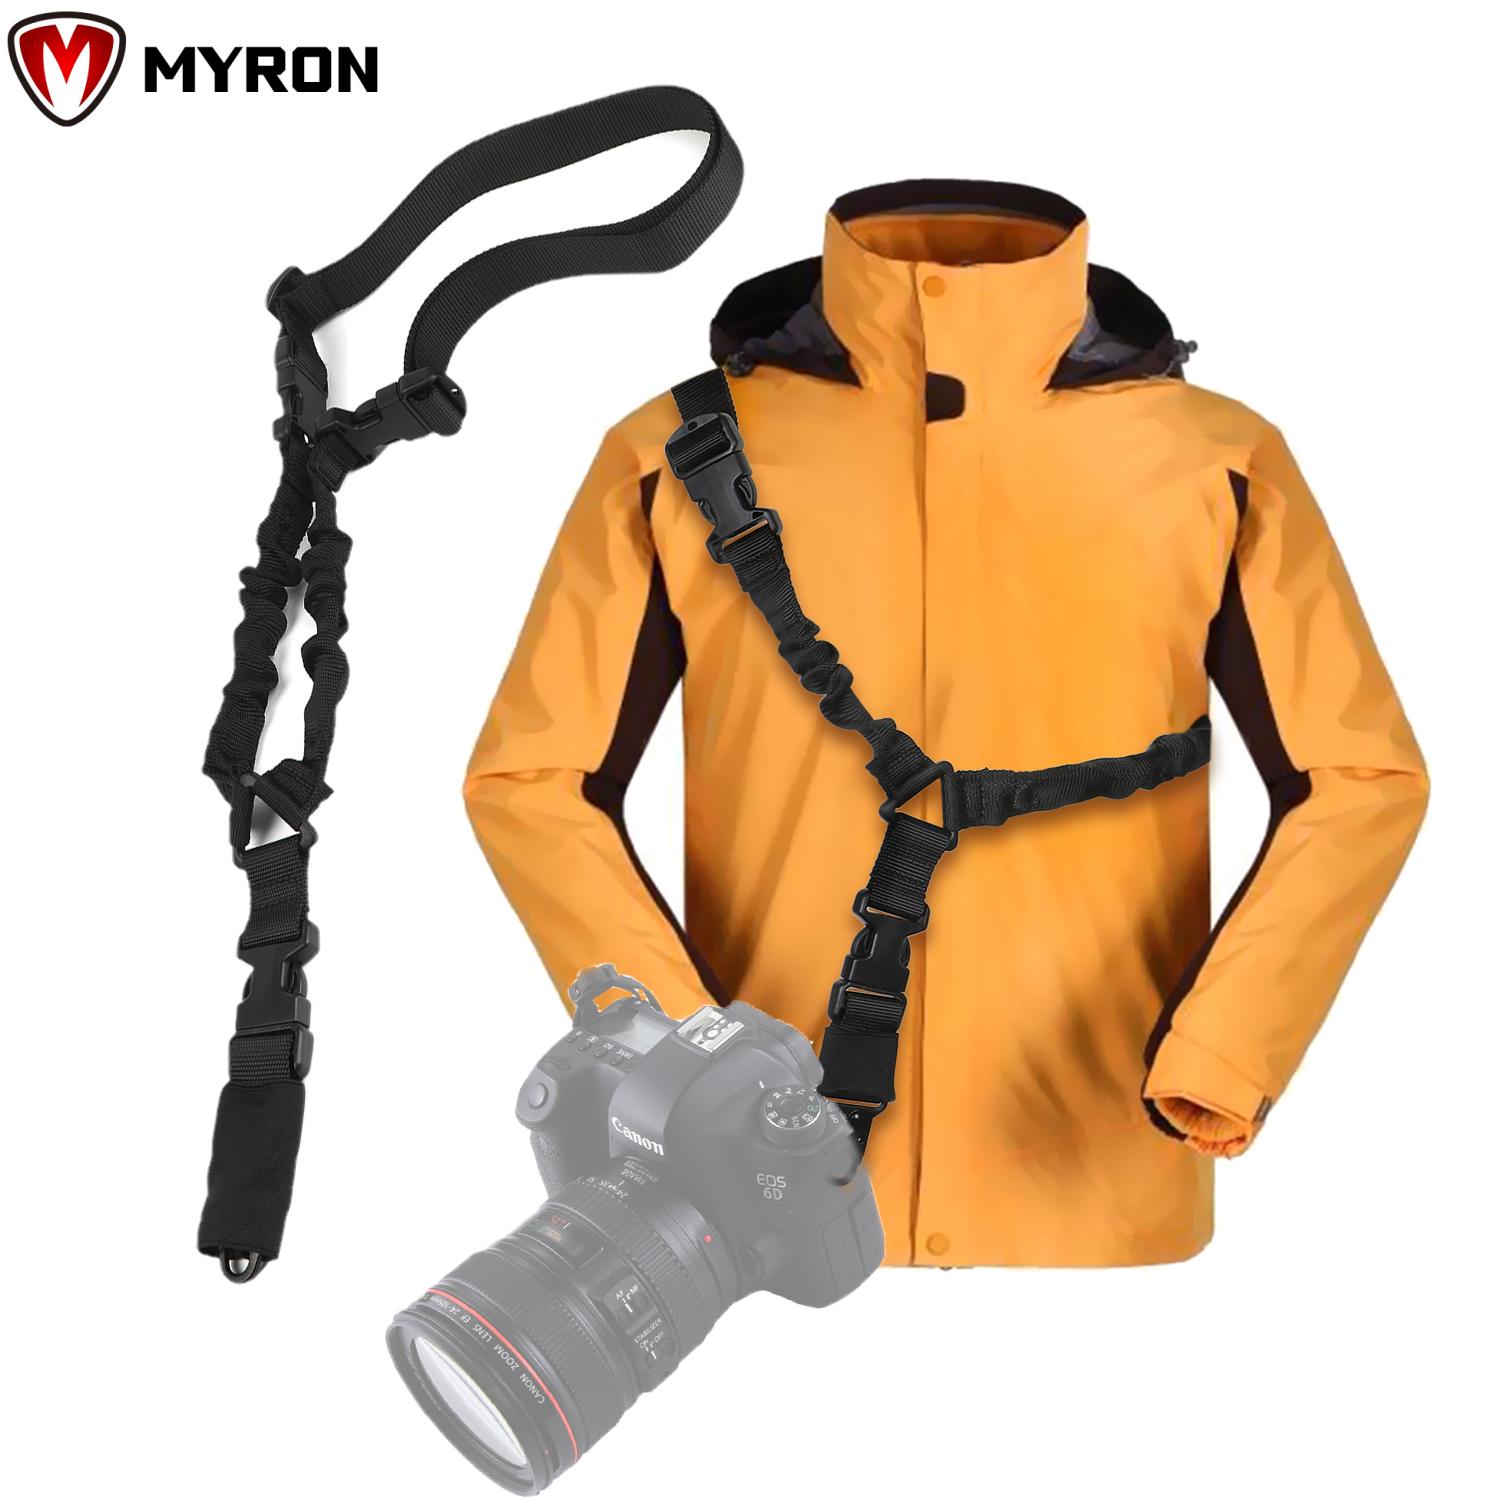 MYRON Heavy Duty Camera Neck Gifts for Men Adjustable Rope with Shoulder Pad Friends black Sling Outdoor Activities Safety Sling